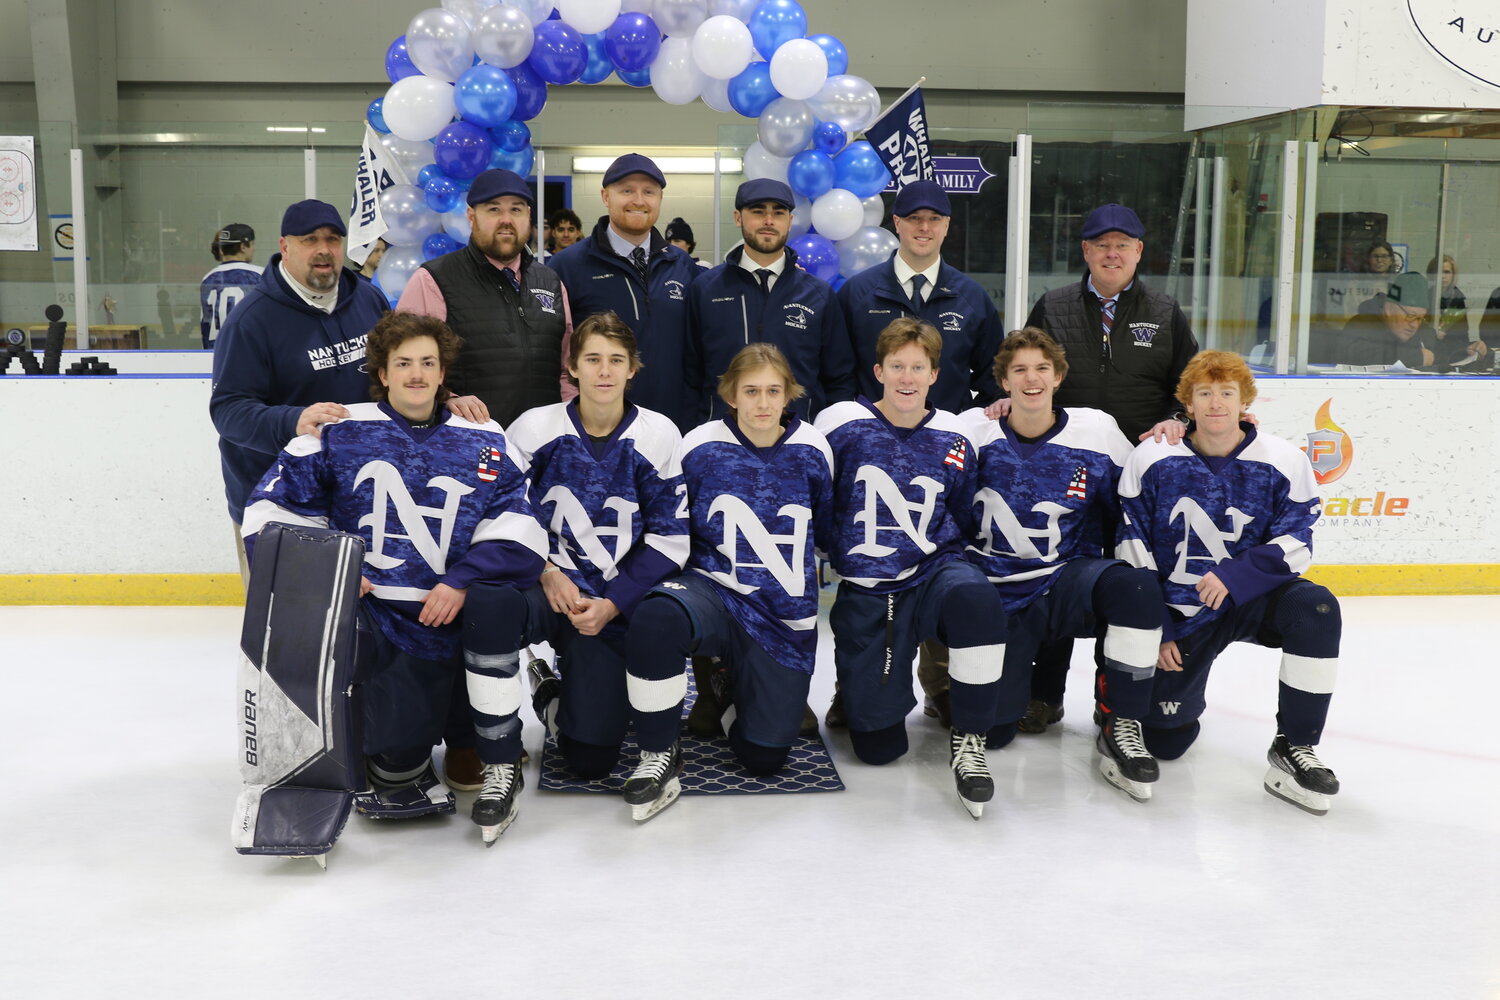 The Whalers seniors and coaching staff ahead of Sunday's 5-0 win over Monomoy/Mashpee. Front row, from left: Griffin Starr, Braden Knapp, Hunter Strojny, Mike Culkins, Ryan Davis and Colby O'Keefe. Back row, from left: Ray Patrick, Bryan Larivee, Chase Colasurdo, Mike Howard, Jack Moran Jr. and Jack Moran.